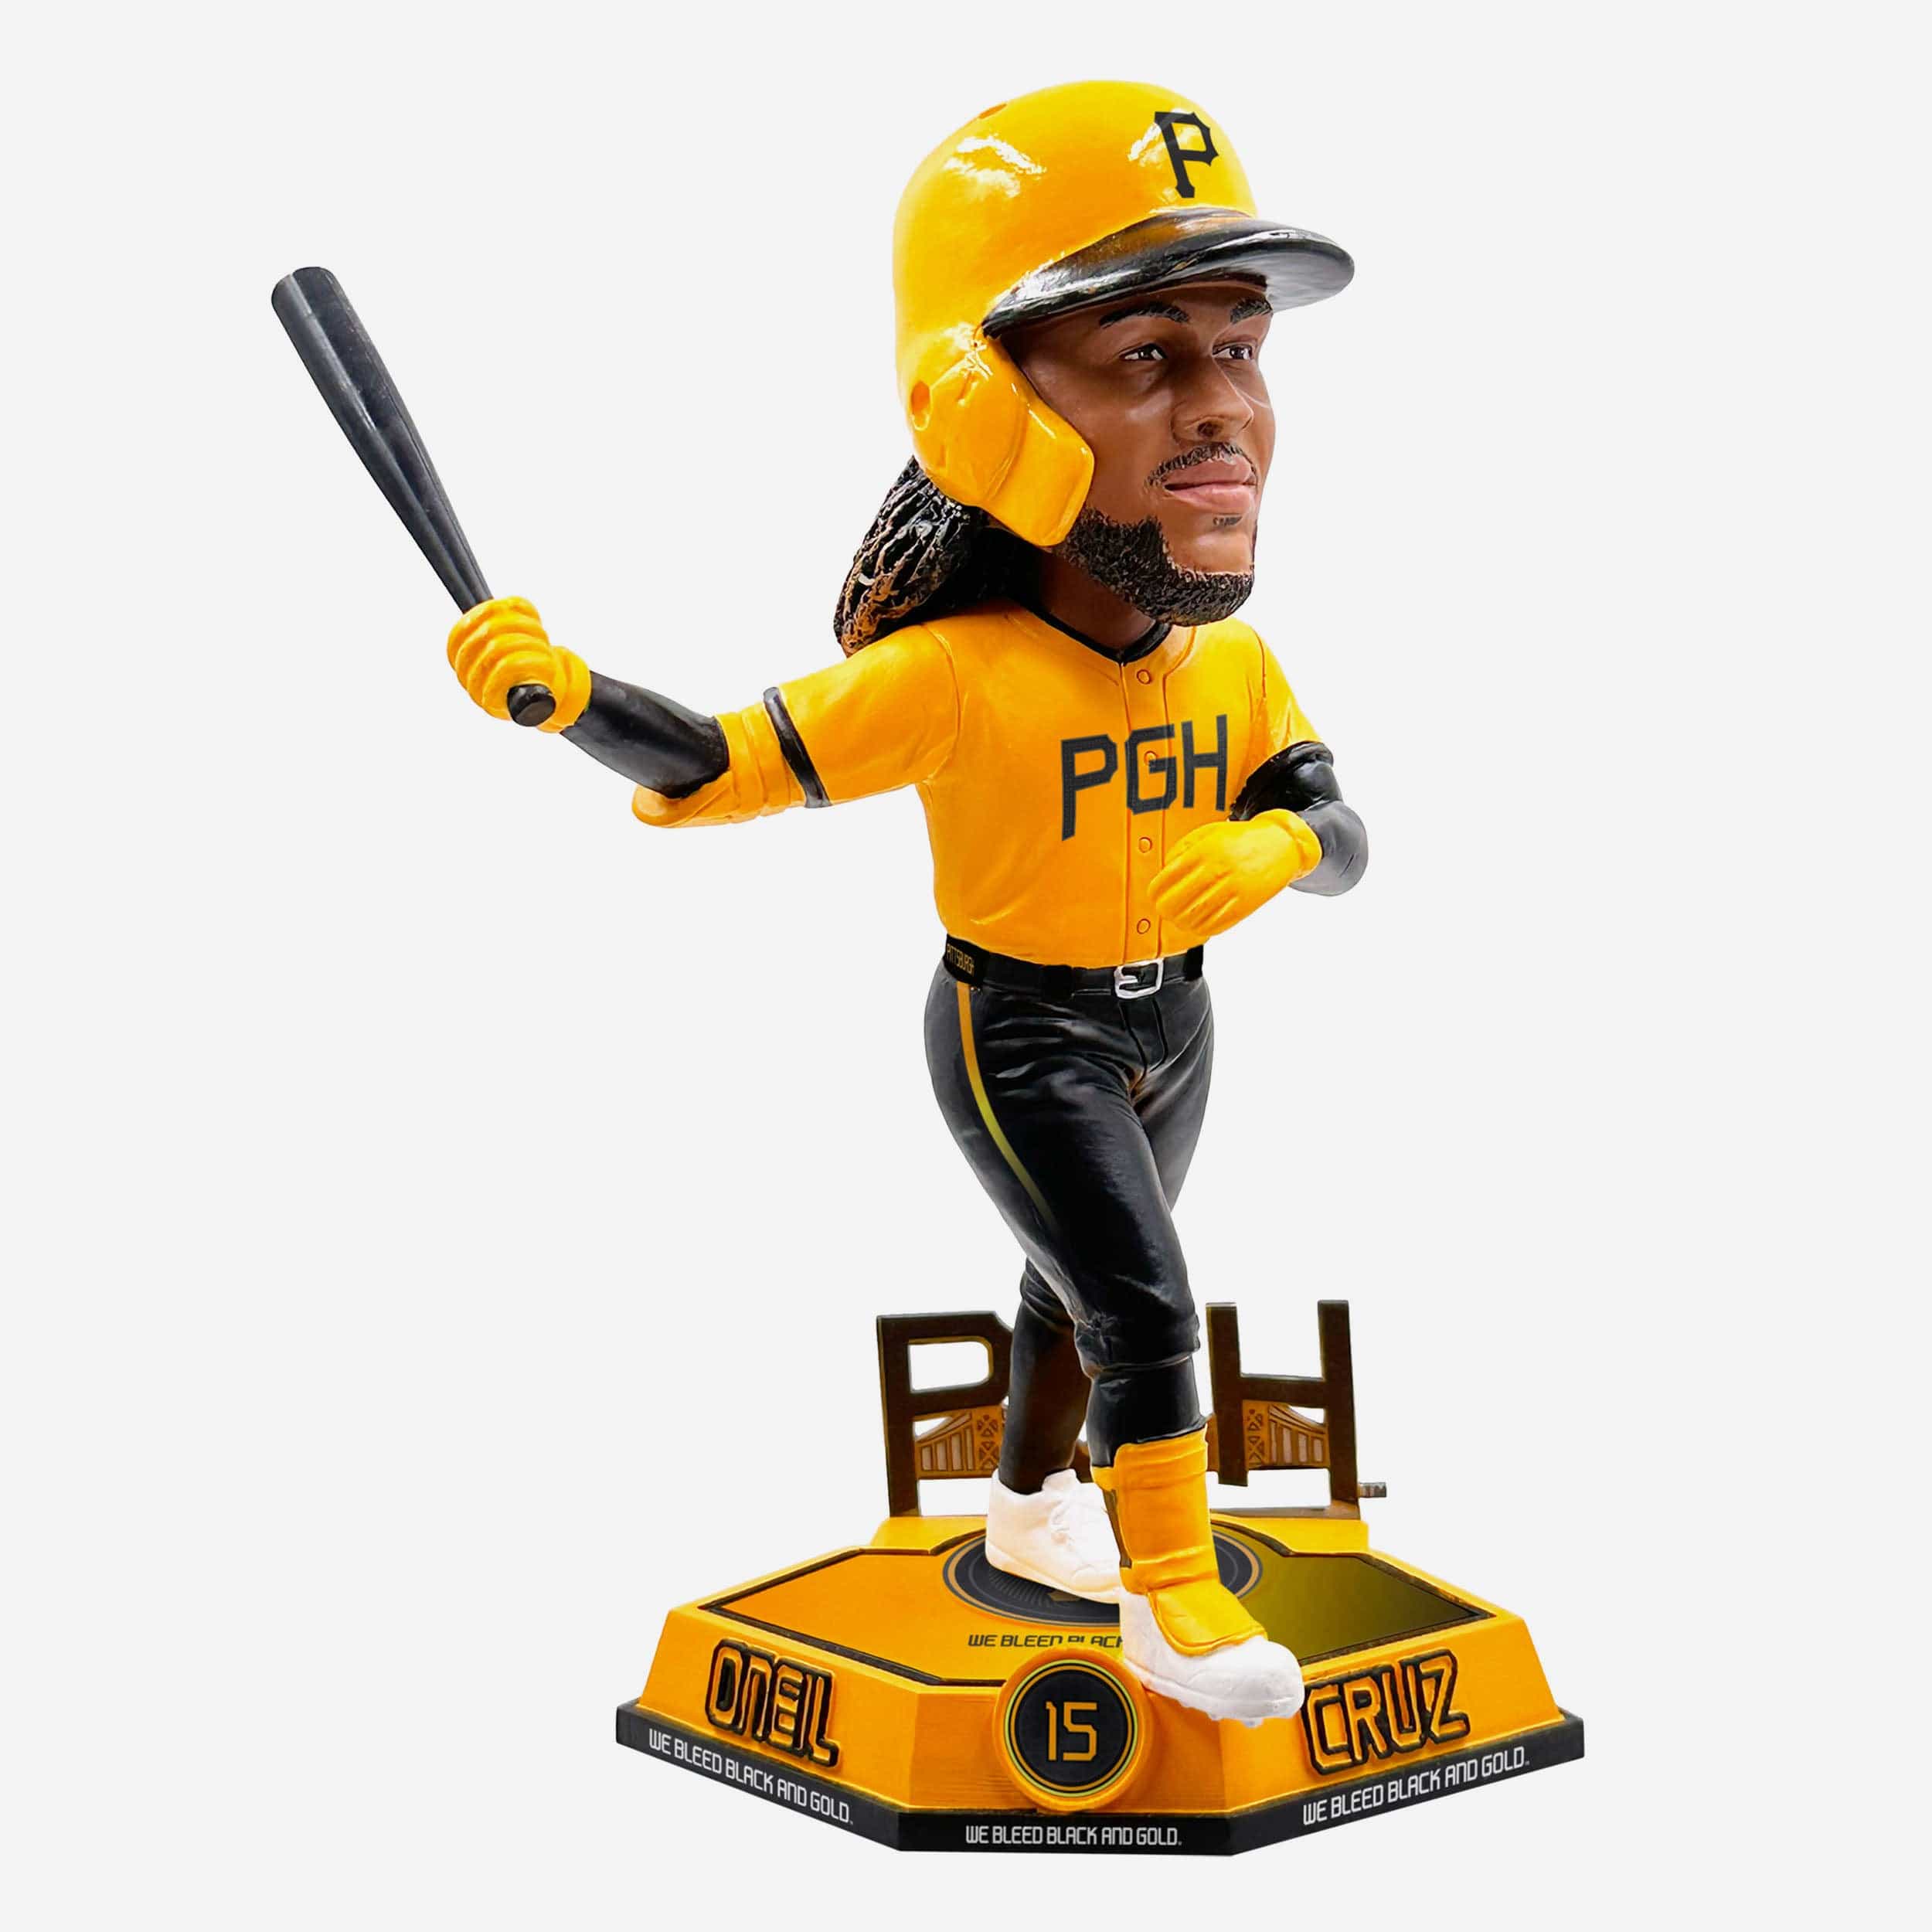 Pittsburgh Pirates: Oneil Cruz 2023 - Officially Licensed MLB